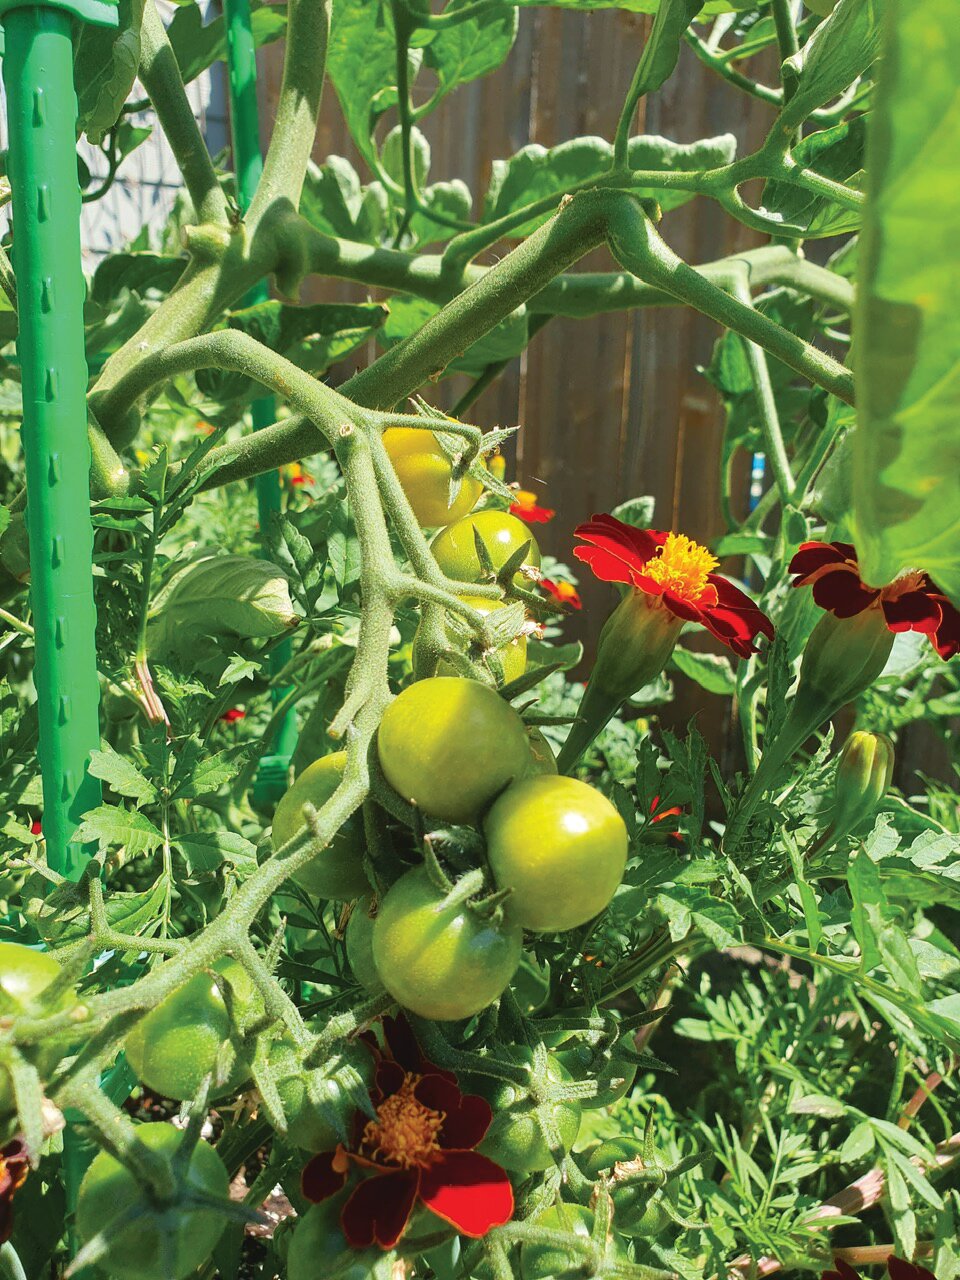 Nearly-ripe Sungold tomatoes grow alongside Red Metamorph marigolds, which offer nectar to pollinators and may deter insect pests. Nearly any vegetable can be grown in a container.